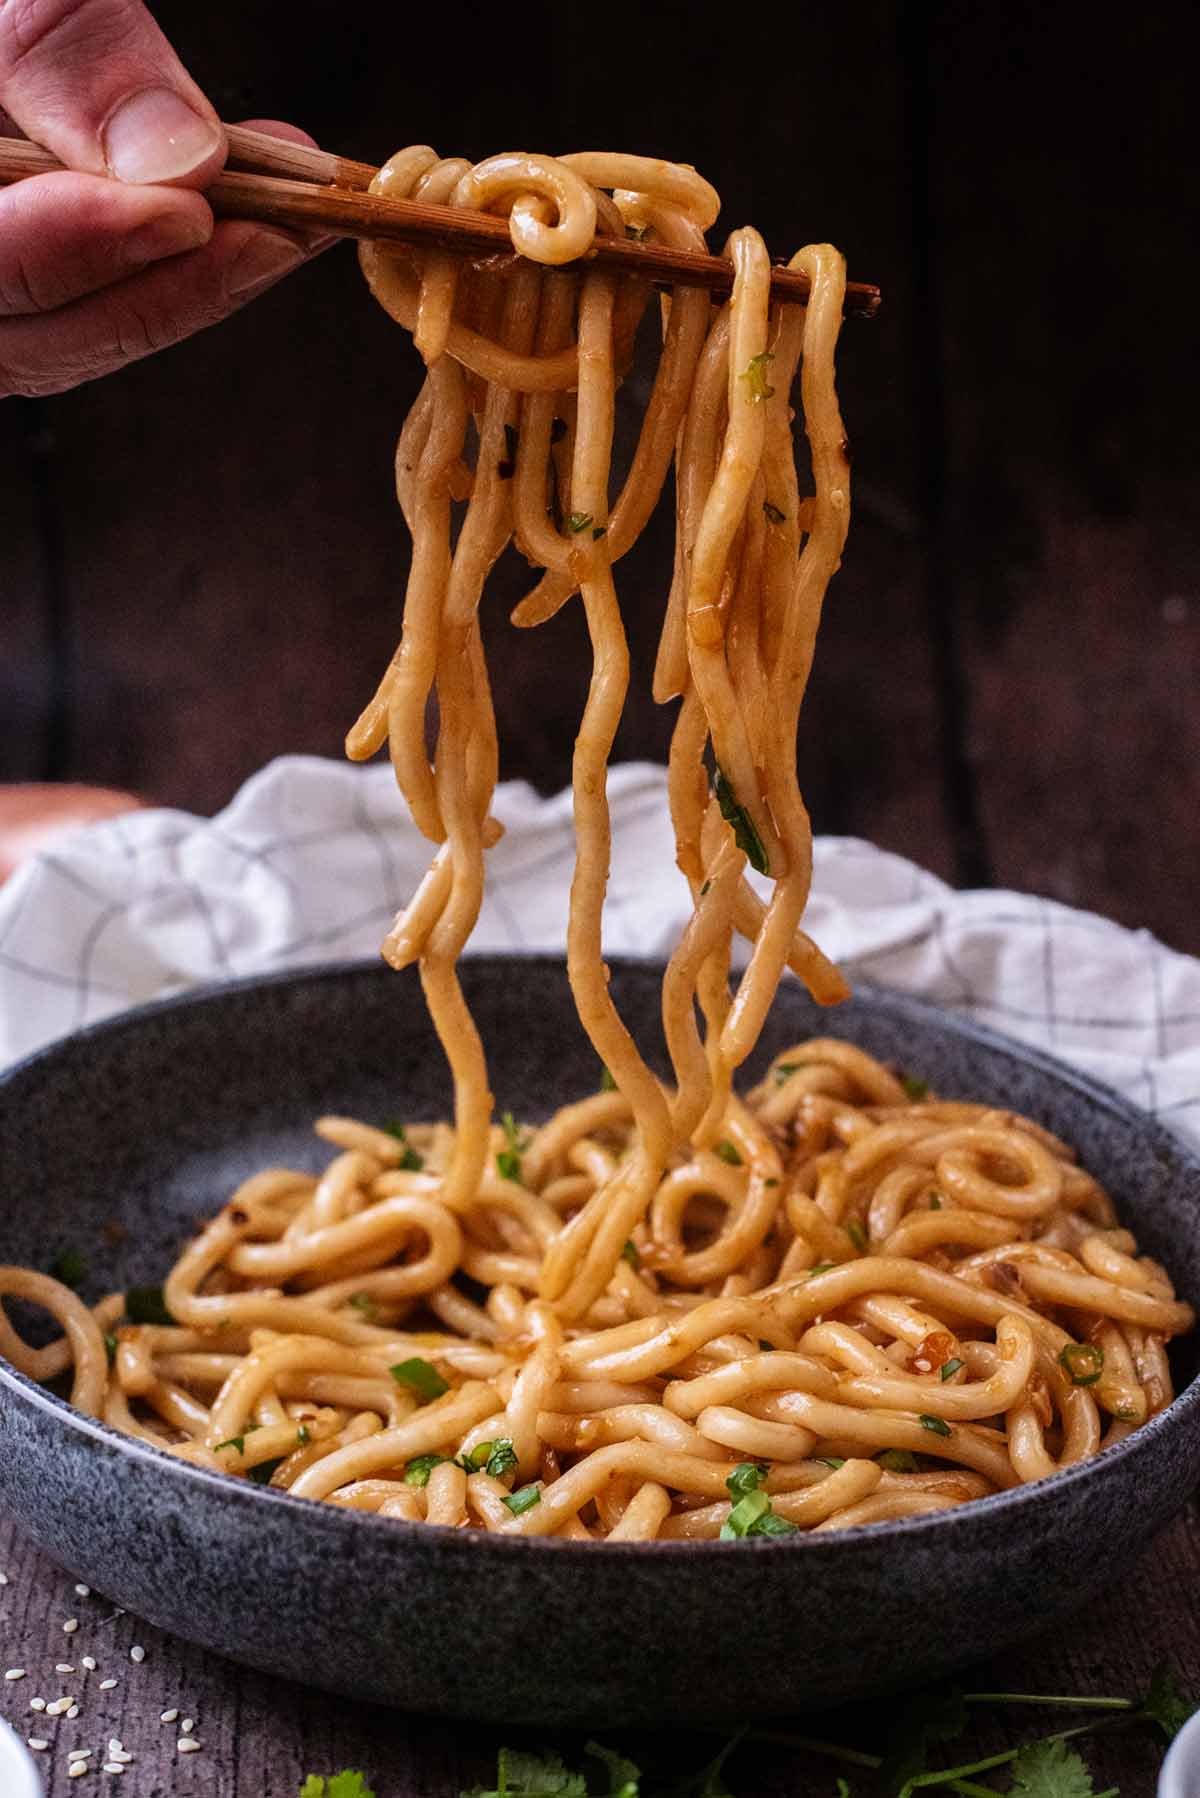 A hand holding chopsticks lifting noodles from a bowl.